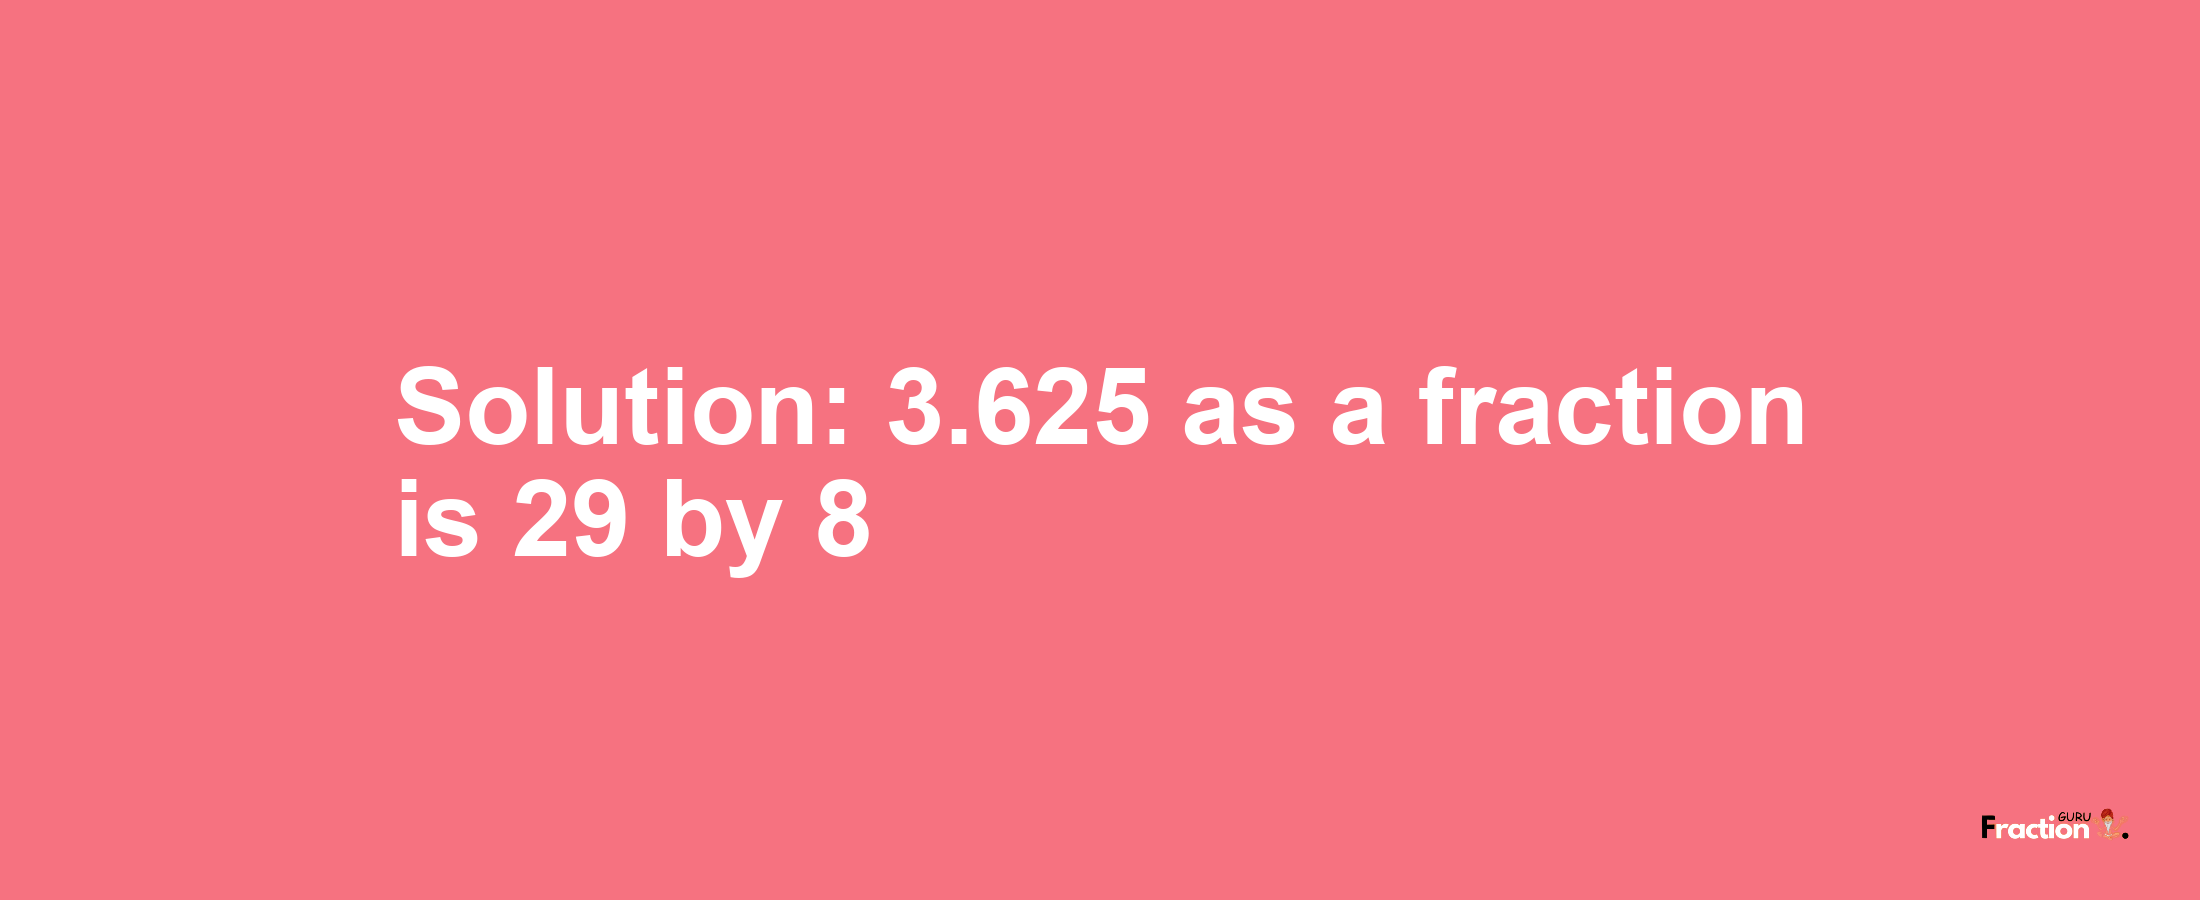 Solution:3.625 as a fraction is 29/8